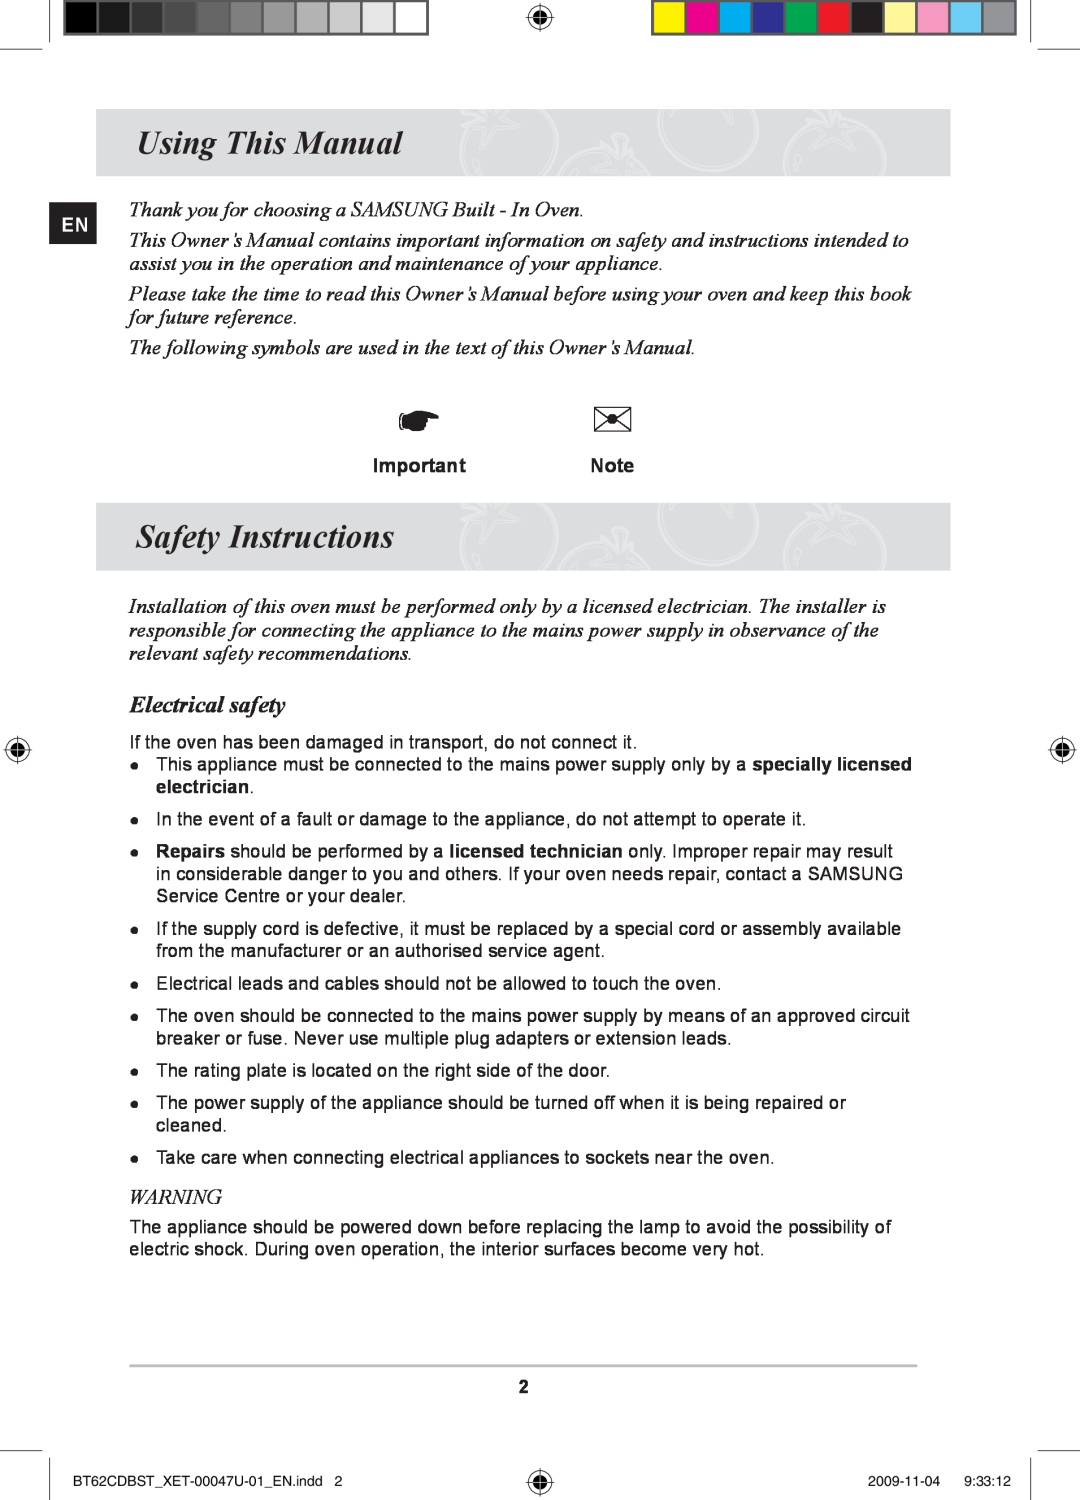 Samsung BT62CDBST/XET manual Using This Manual, Safety Instructions, Electrical safety 